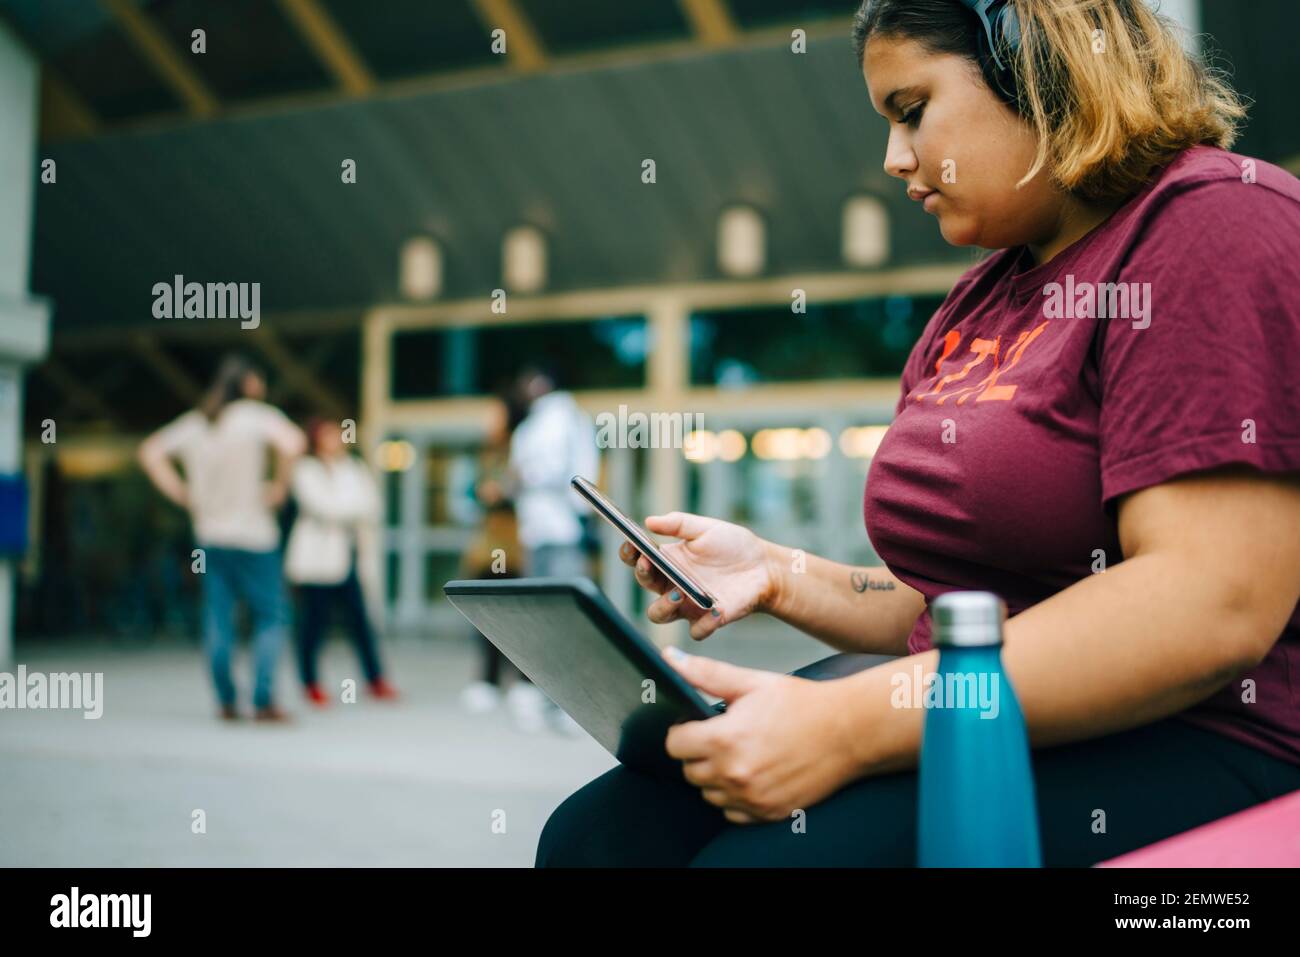 Female student with laptop using smart phone in university campus Stock Photo